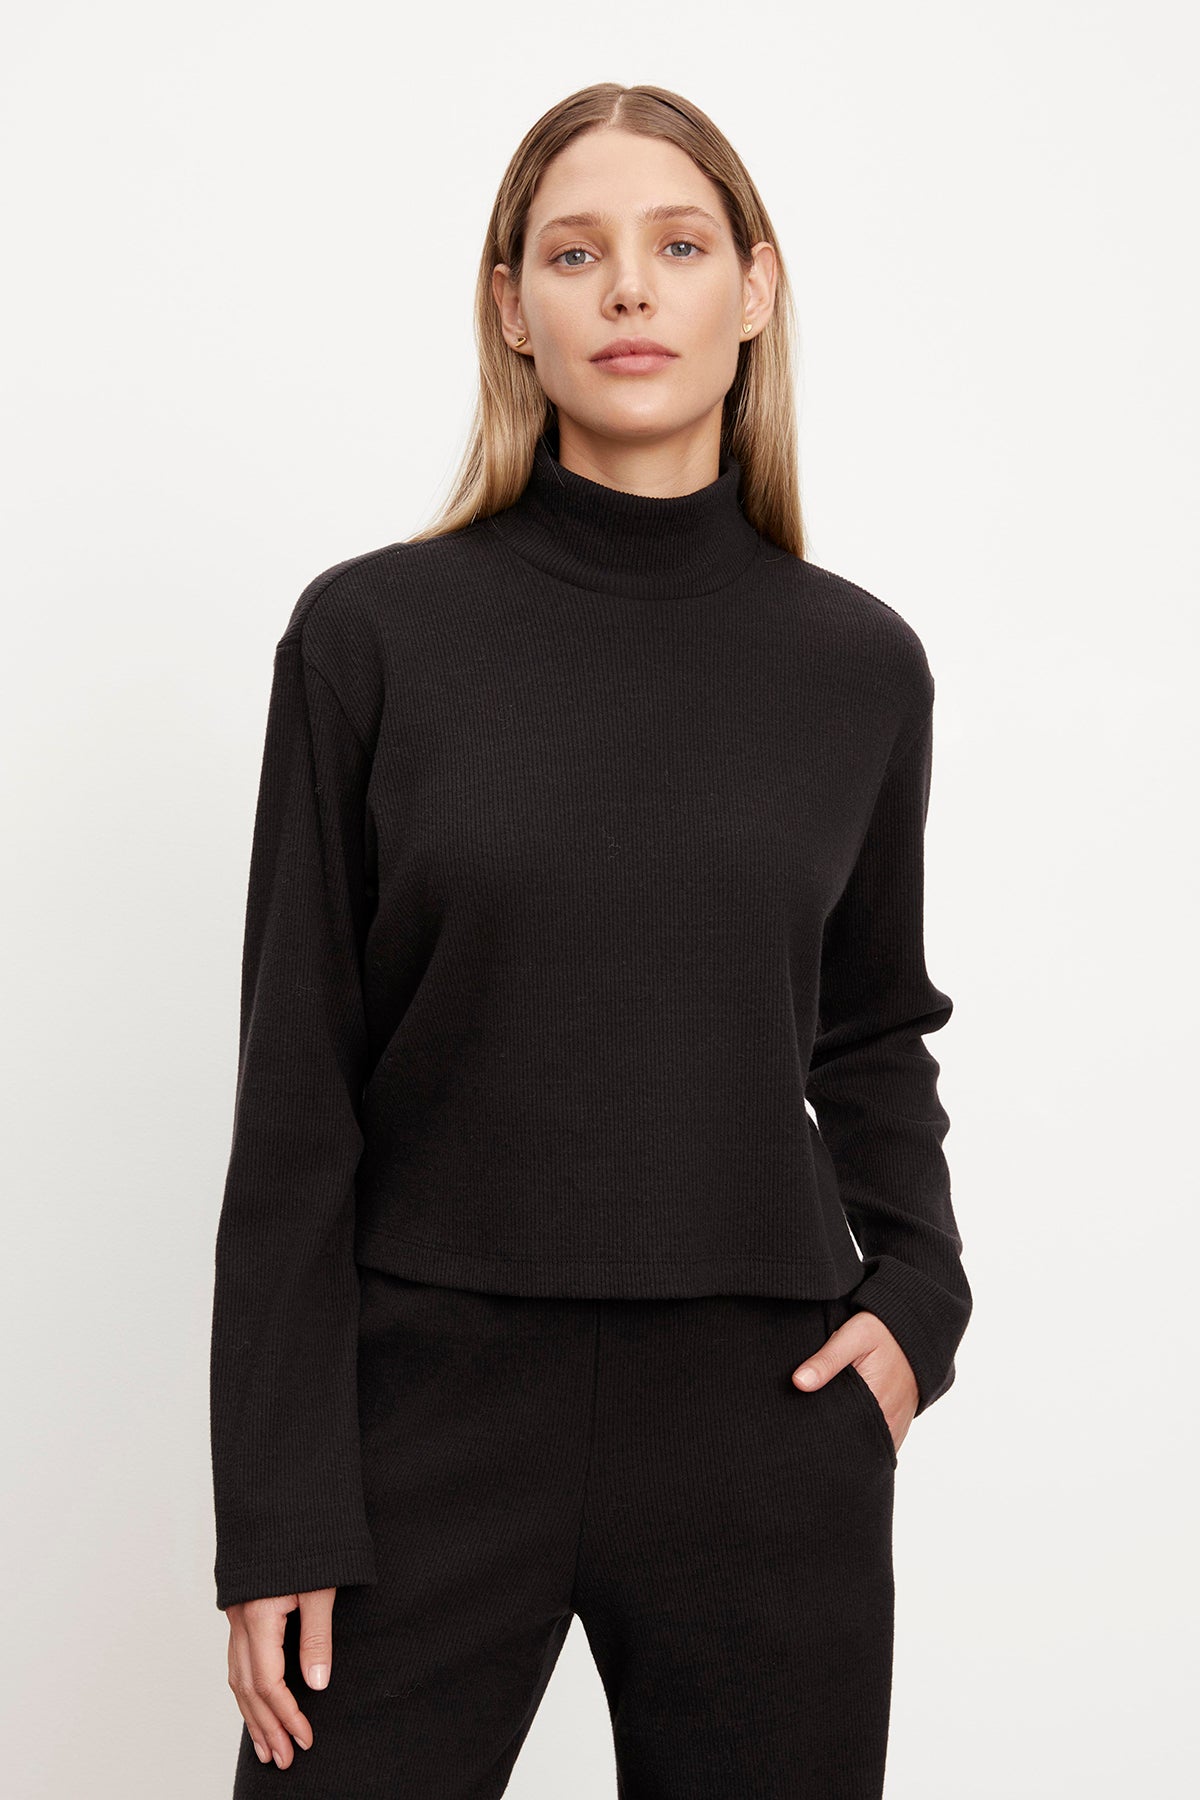 A woman in a Velvet by Graham & Spencer ALEC BRUSHED RIB MOCK NECK TOP and black pants.-35701823439041